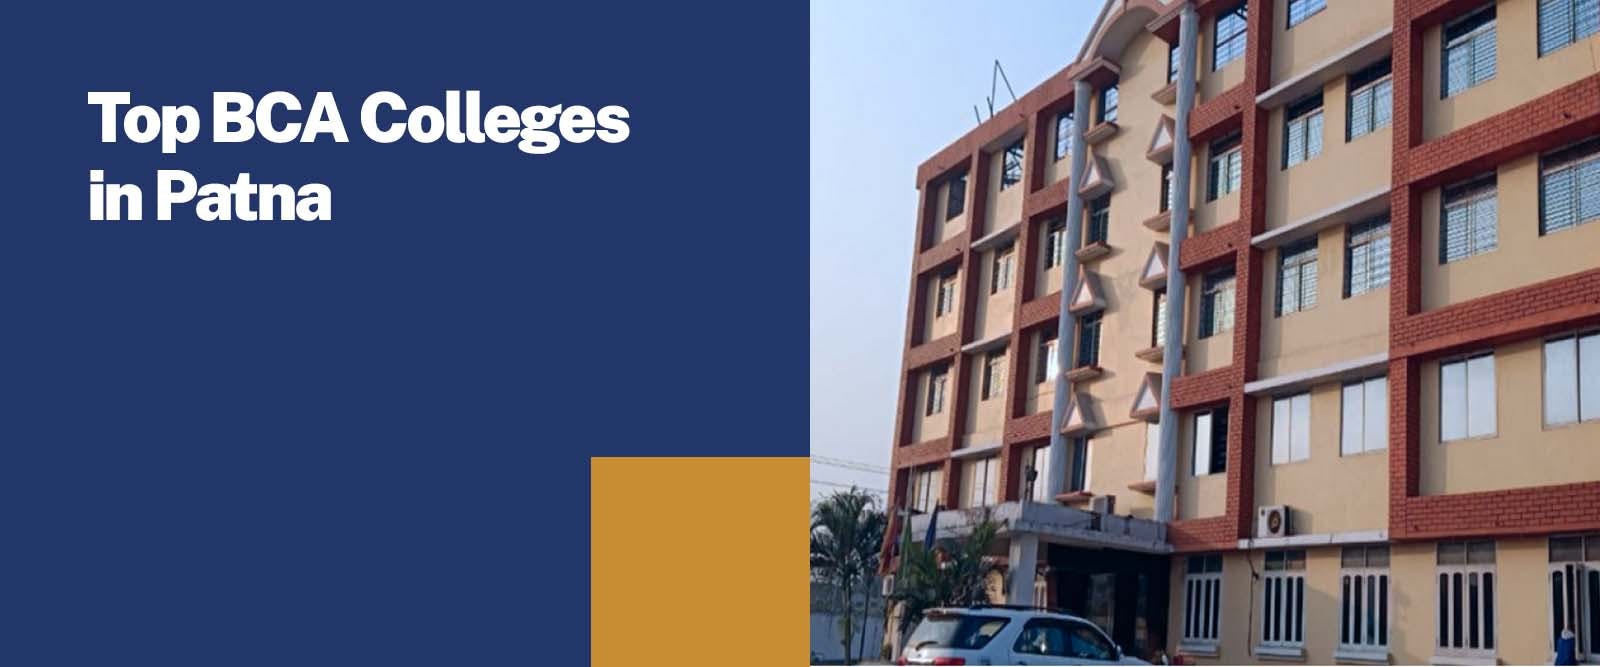 BCA Colleges in Patna